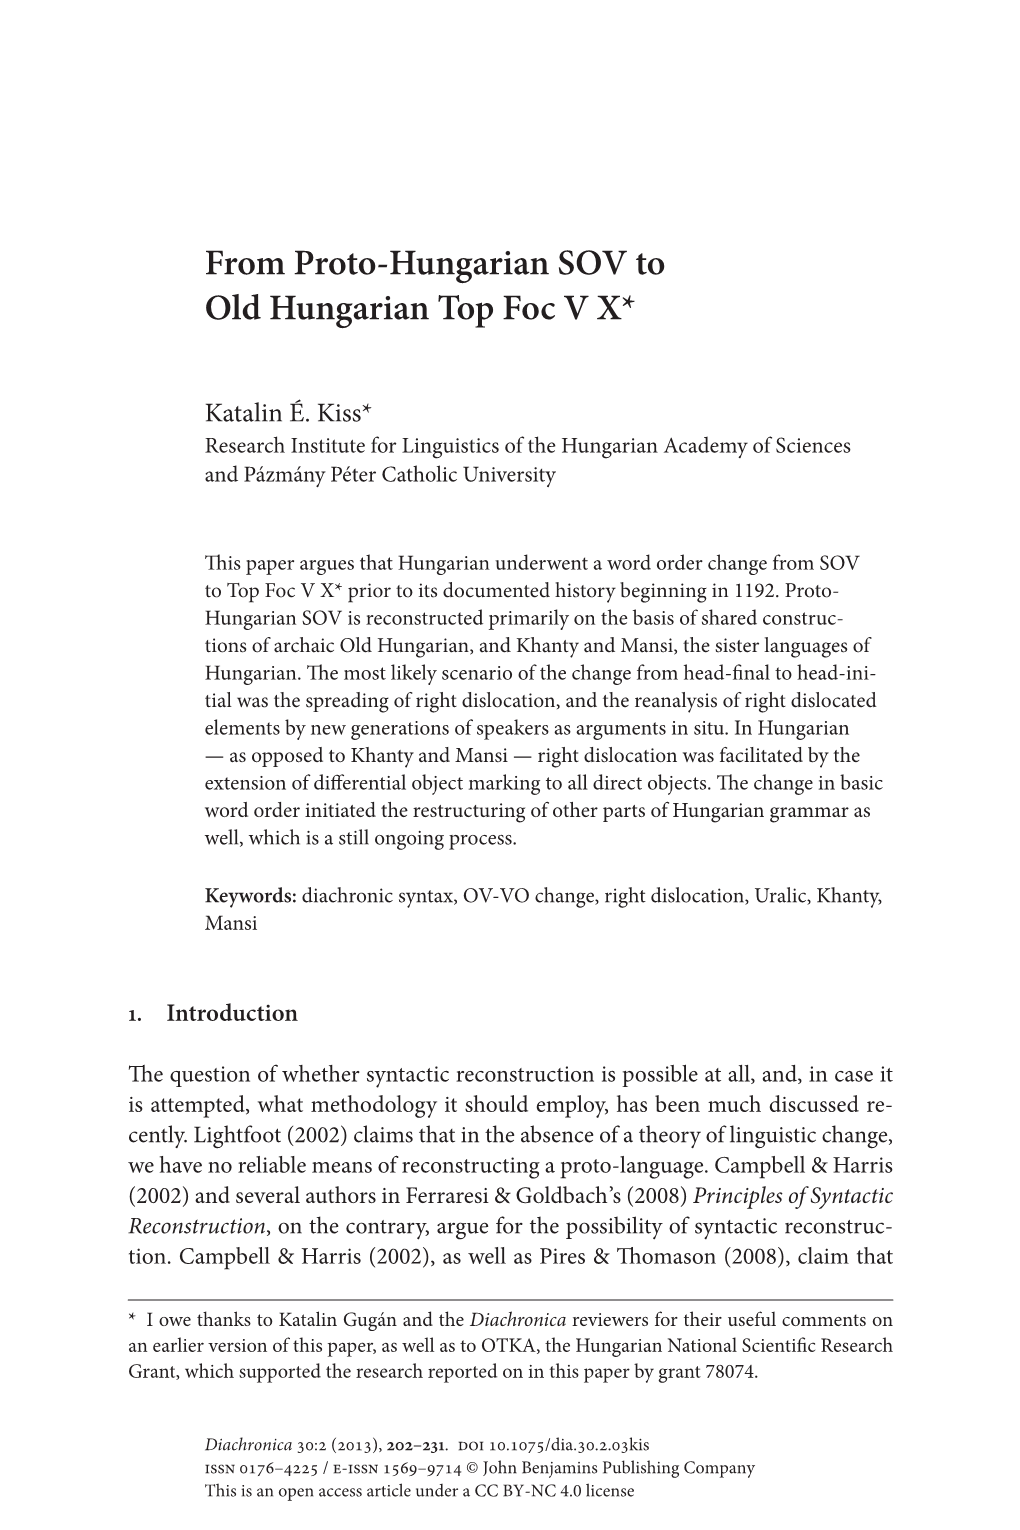 From Proto-Hungarian SOV to Old Hungarian Top Foc VX